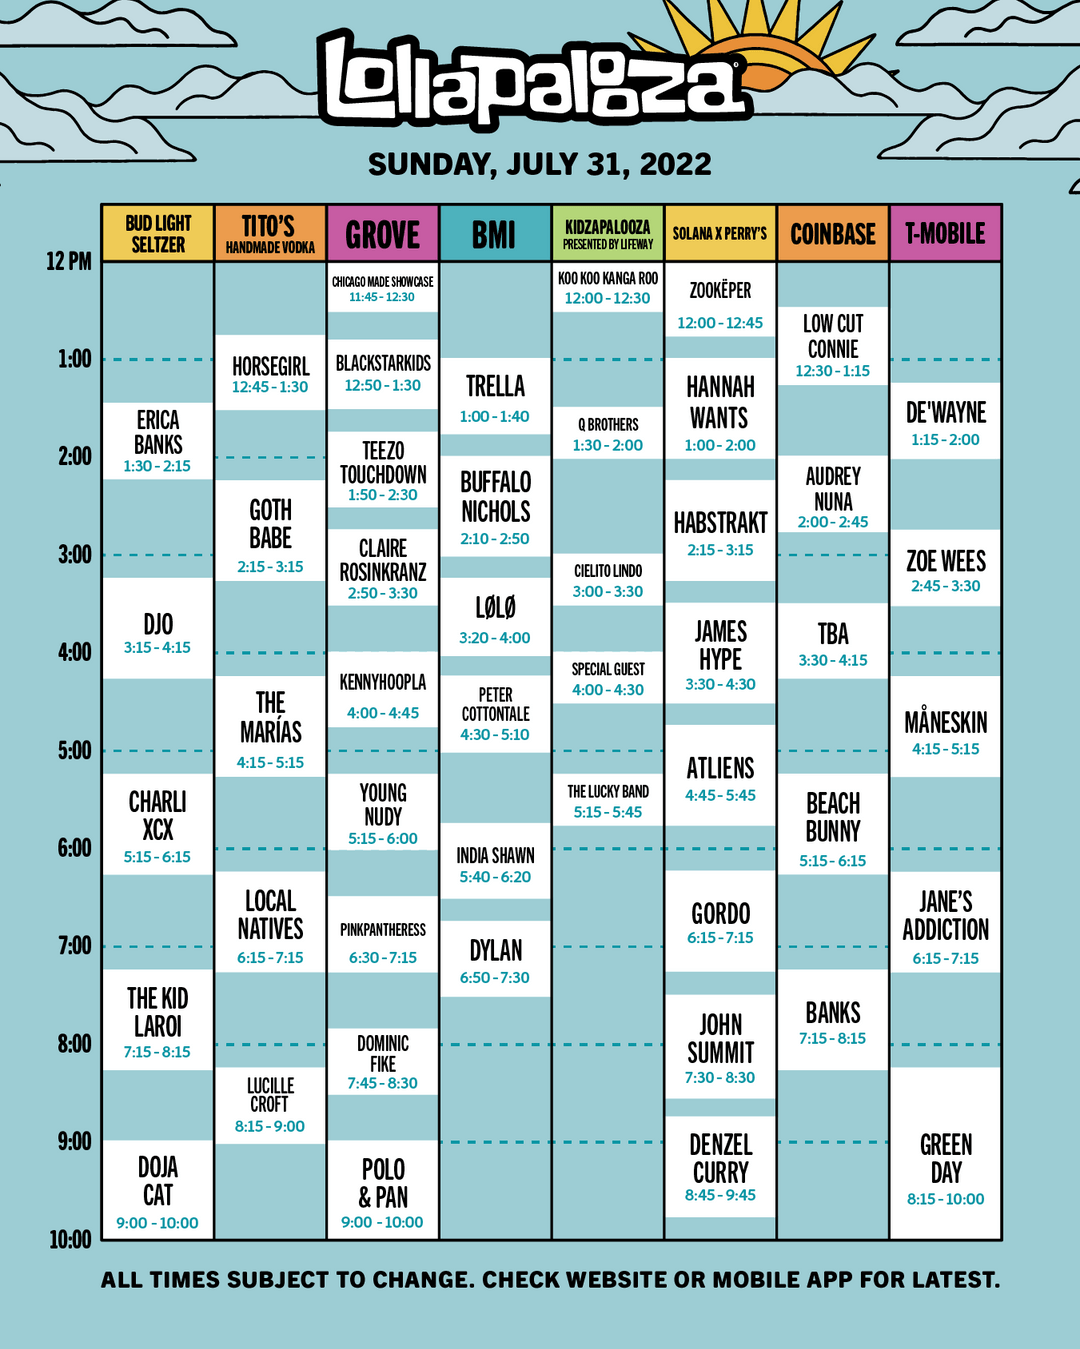 2022 Lollapalooza Schedule Announced 5